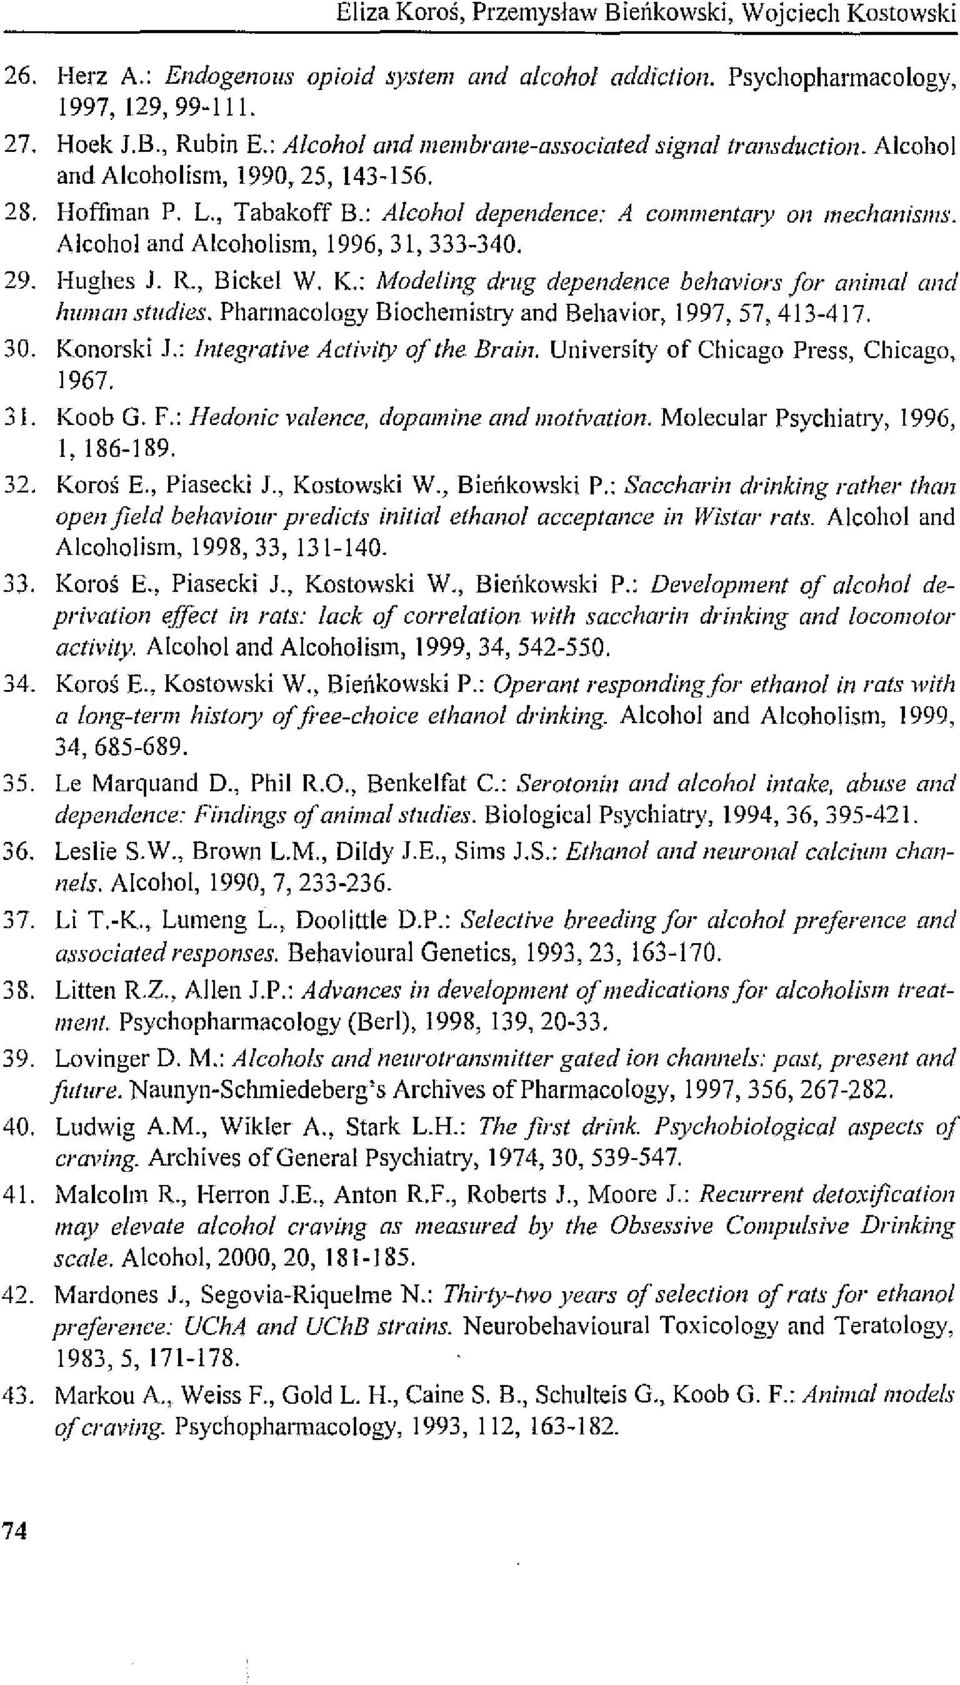 : A/eoho/ dependenee: A eommentmy on mechanisms, Alcohol and Alcoholism, 1996, 31,333-340, 29, Hughes j, R" Bickel W, K,: Modeling drllg dependenee behaviors far anima/ and hllman stlldies,